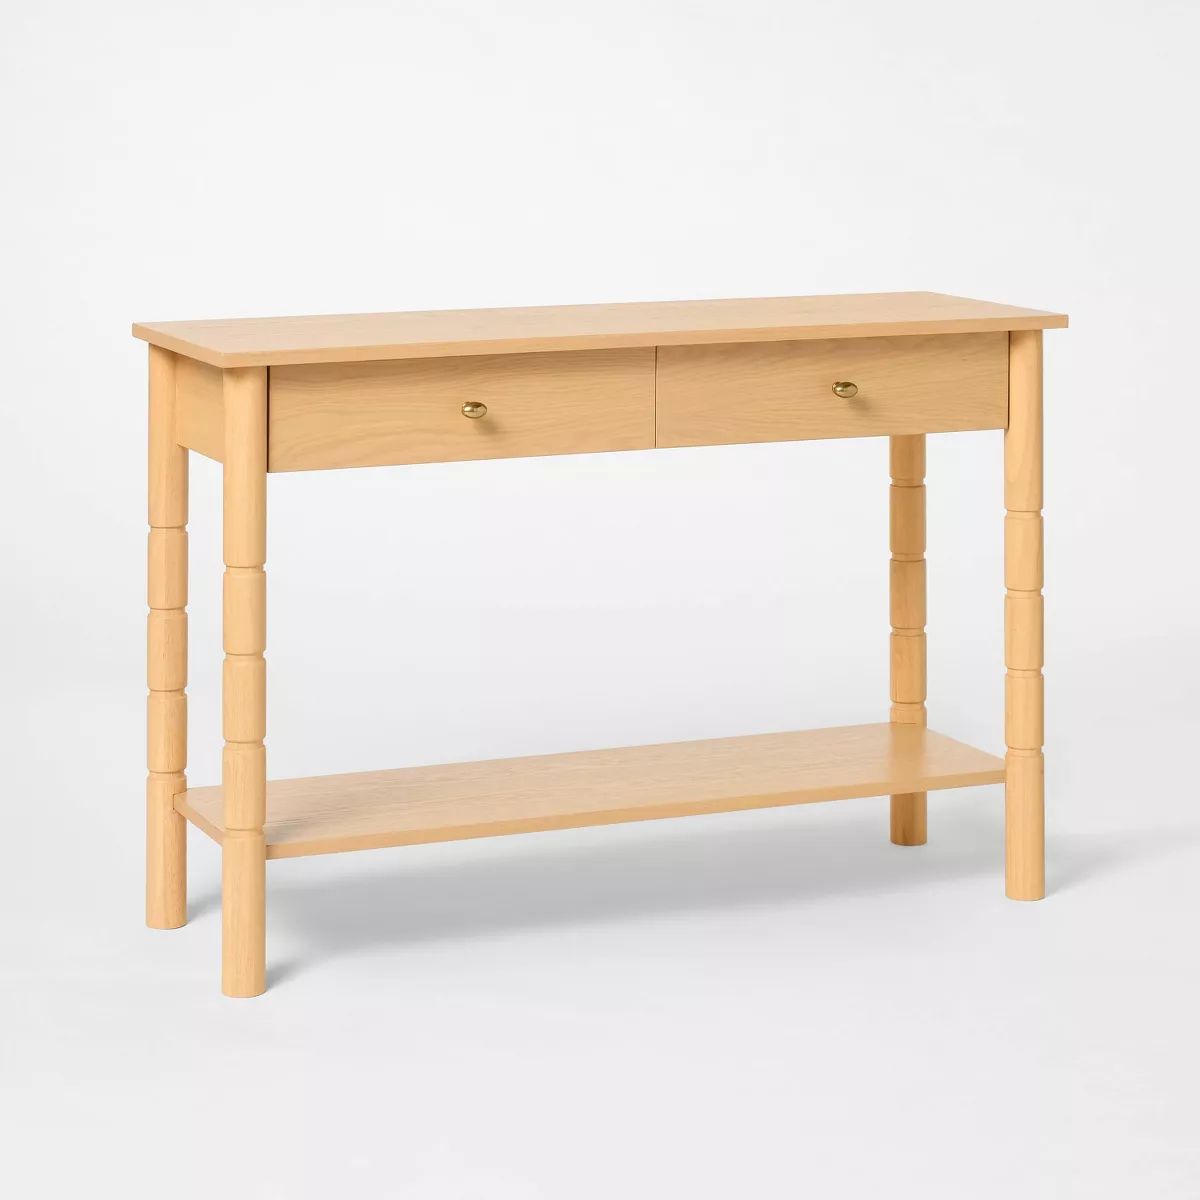 48" Modern Wooden Console Table with Drawer Brown - Threshold™ designed with Studio McGee | Target